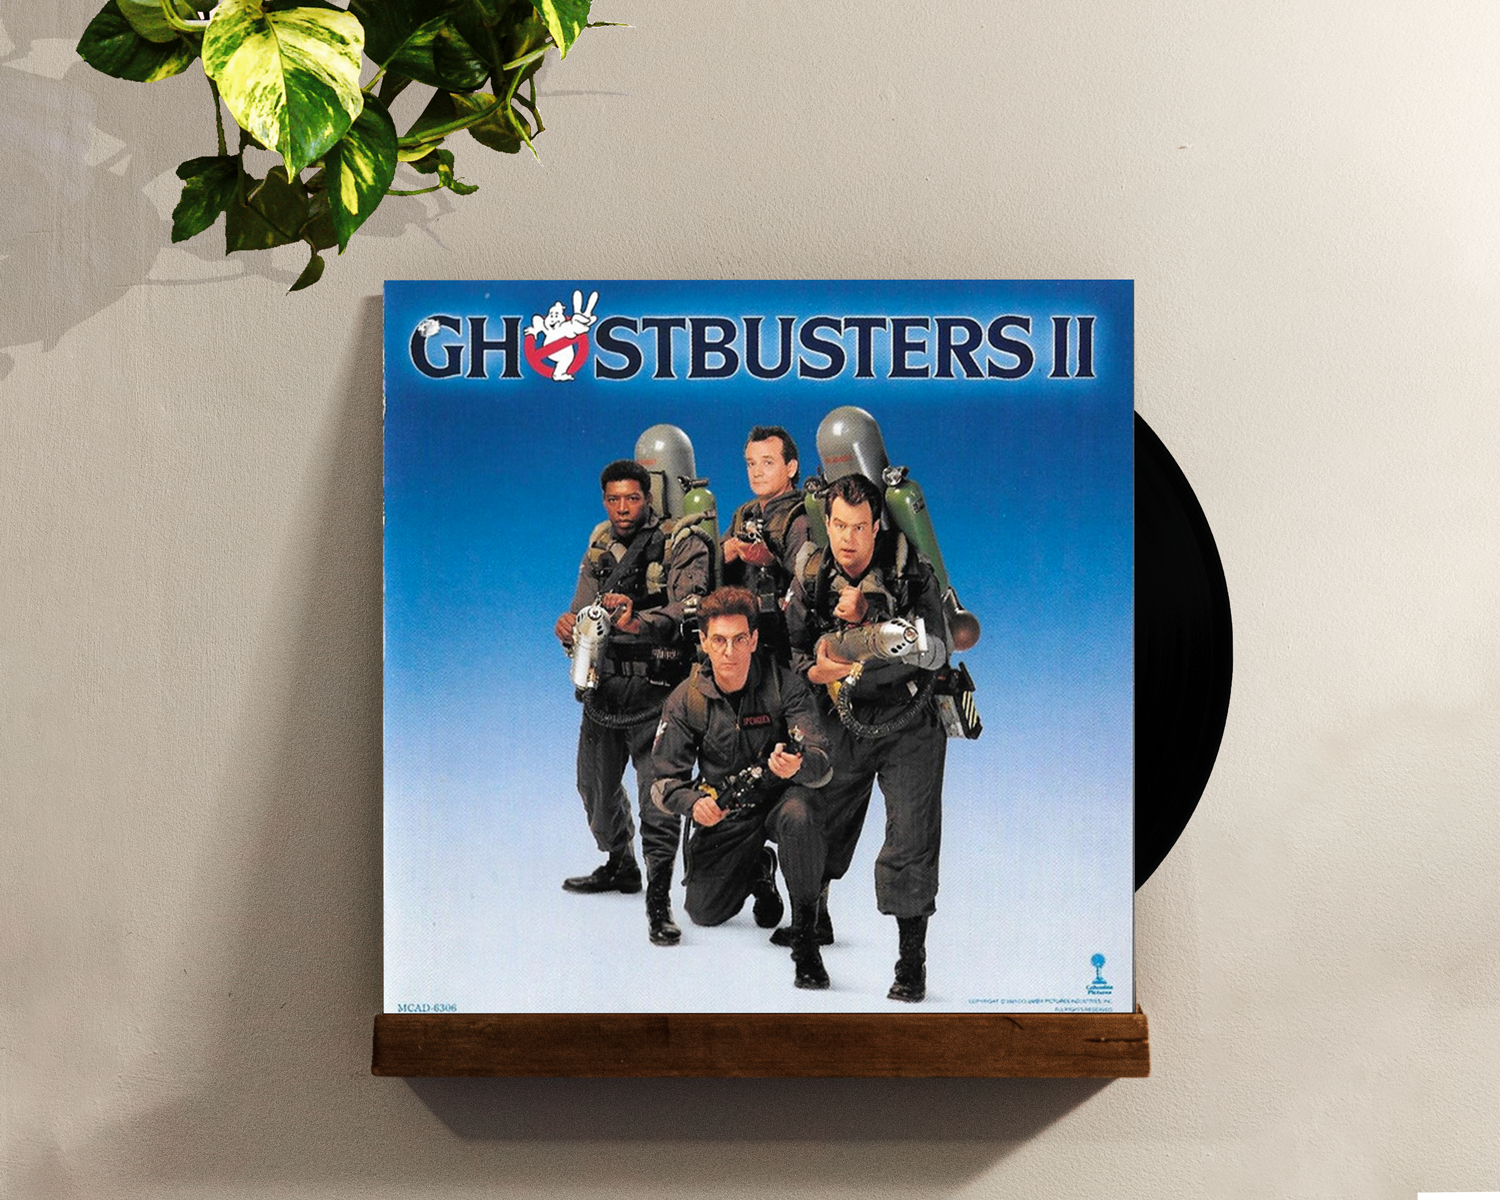 Ghostbusters II - My Record Collection - Vinyl